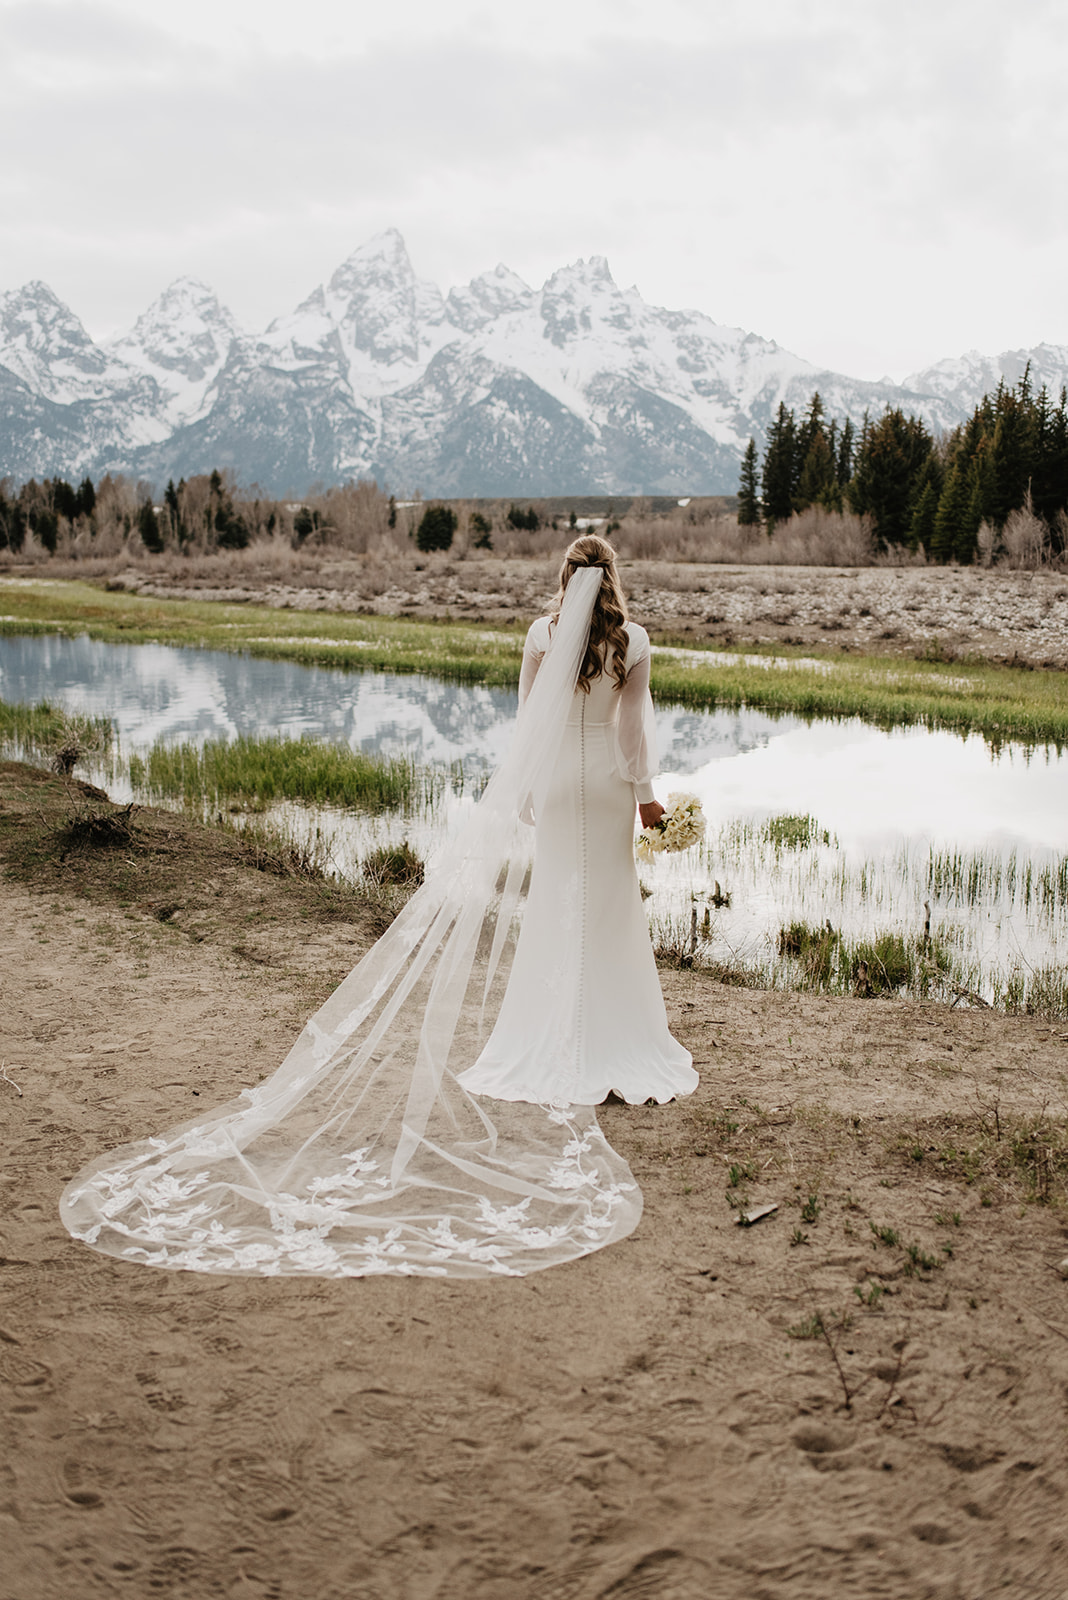 Jackson Hole bride walking towards a river in the Tetons with her long lace veil trailing behind her and the Tetons in the back ground